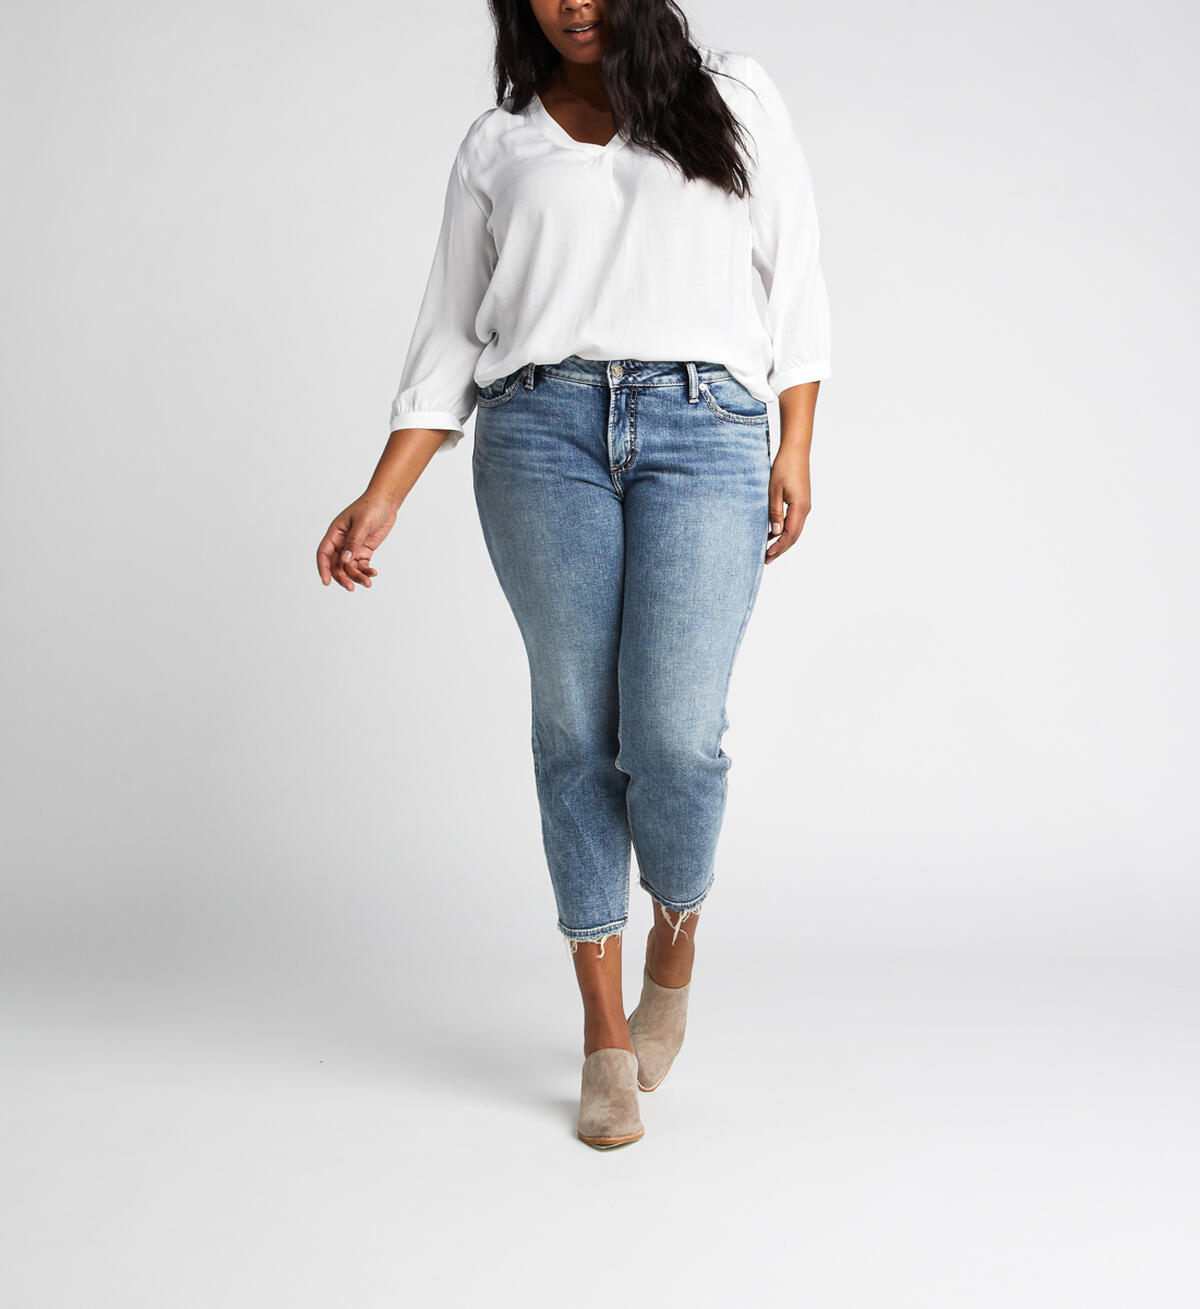 Elyse Mid-Rise Curvy Relaxed Slim Crop Jeans, , hi-res image number 0